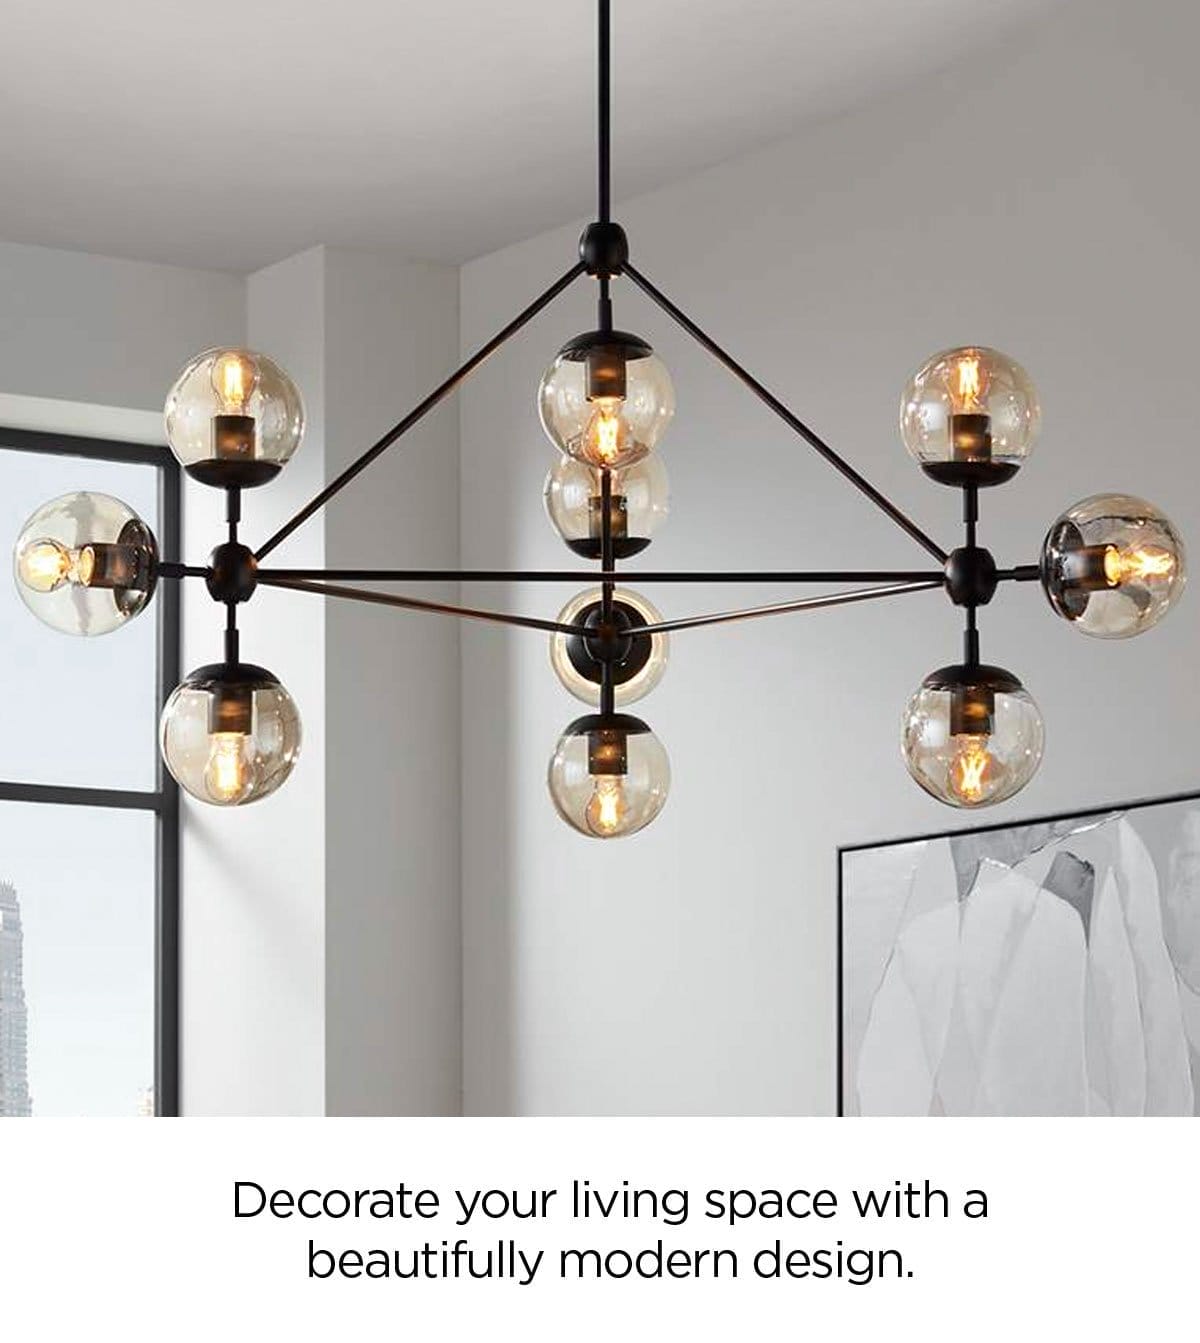 Decorate your living space with a beautifully modern design.